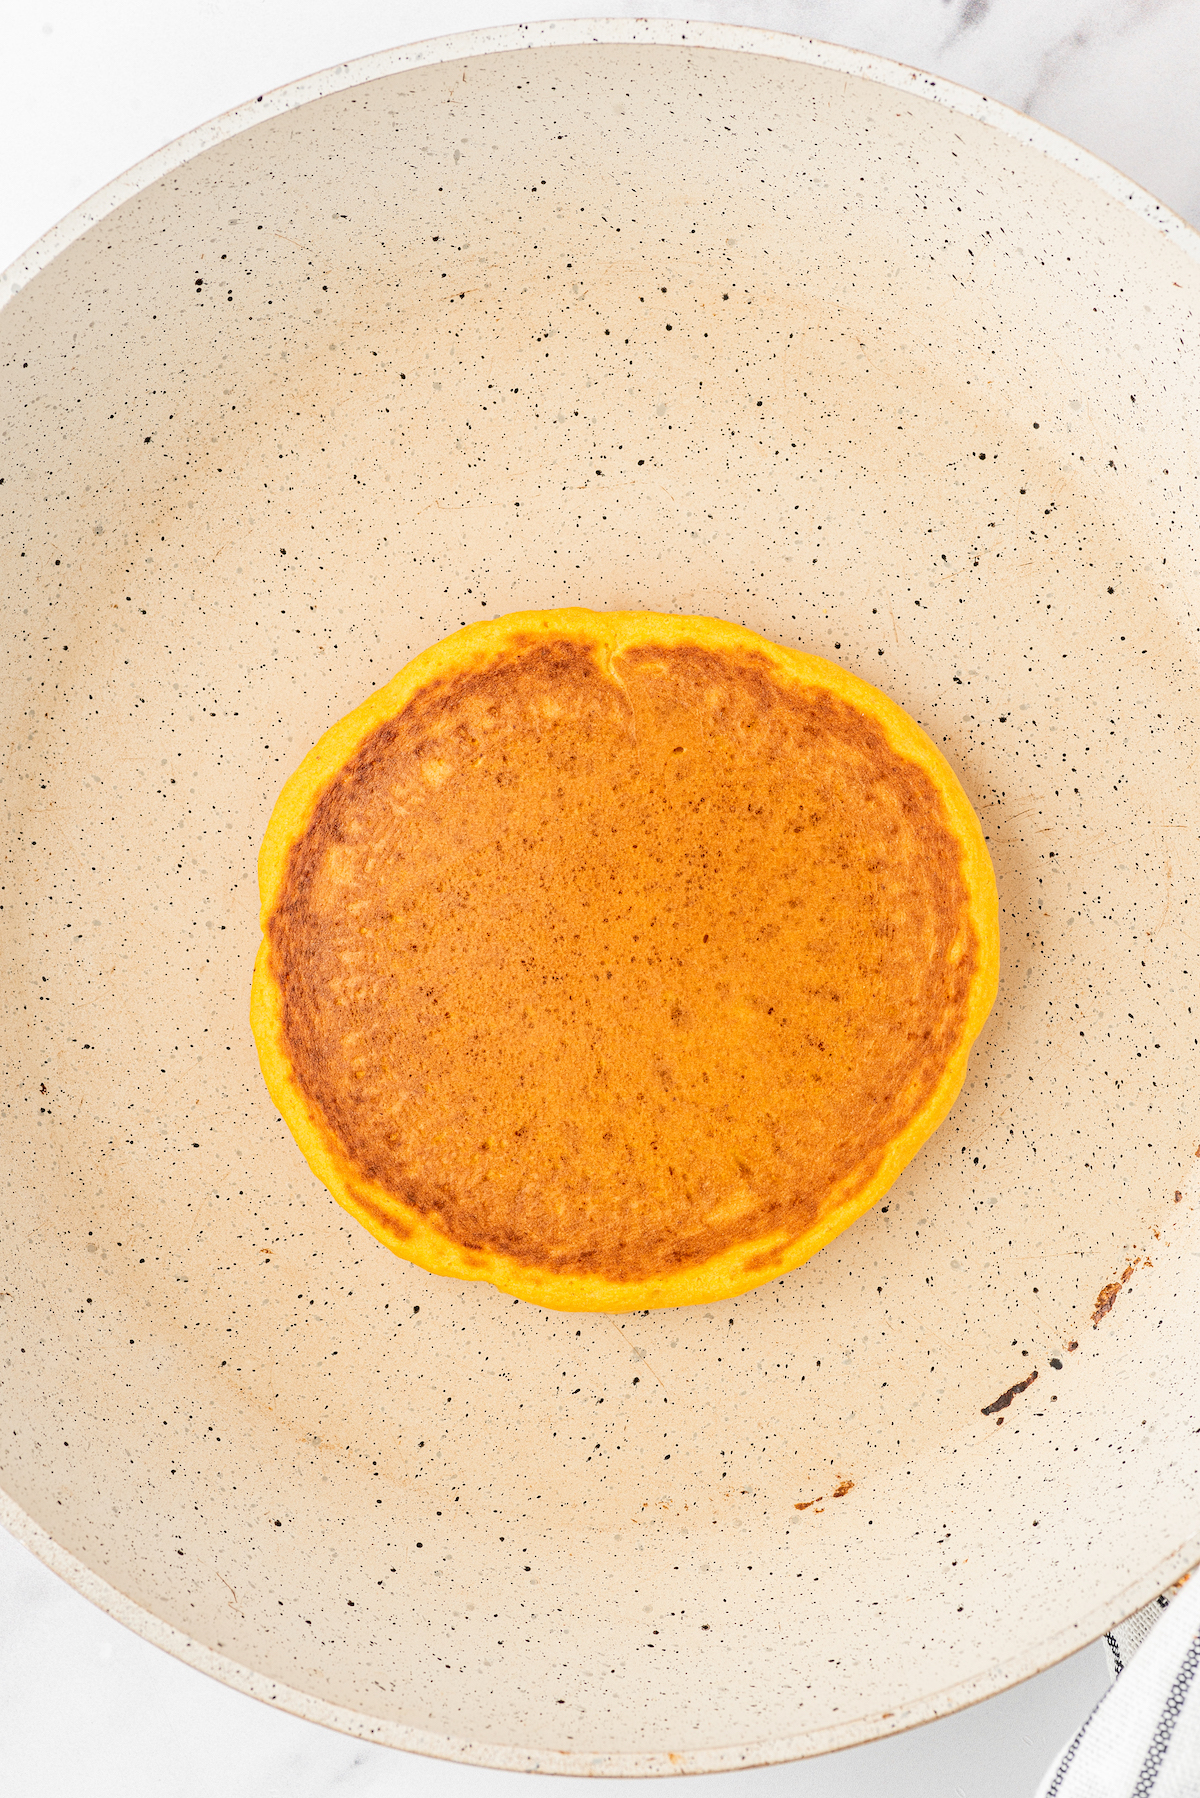 One pancake being cooked in a non-stick pan